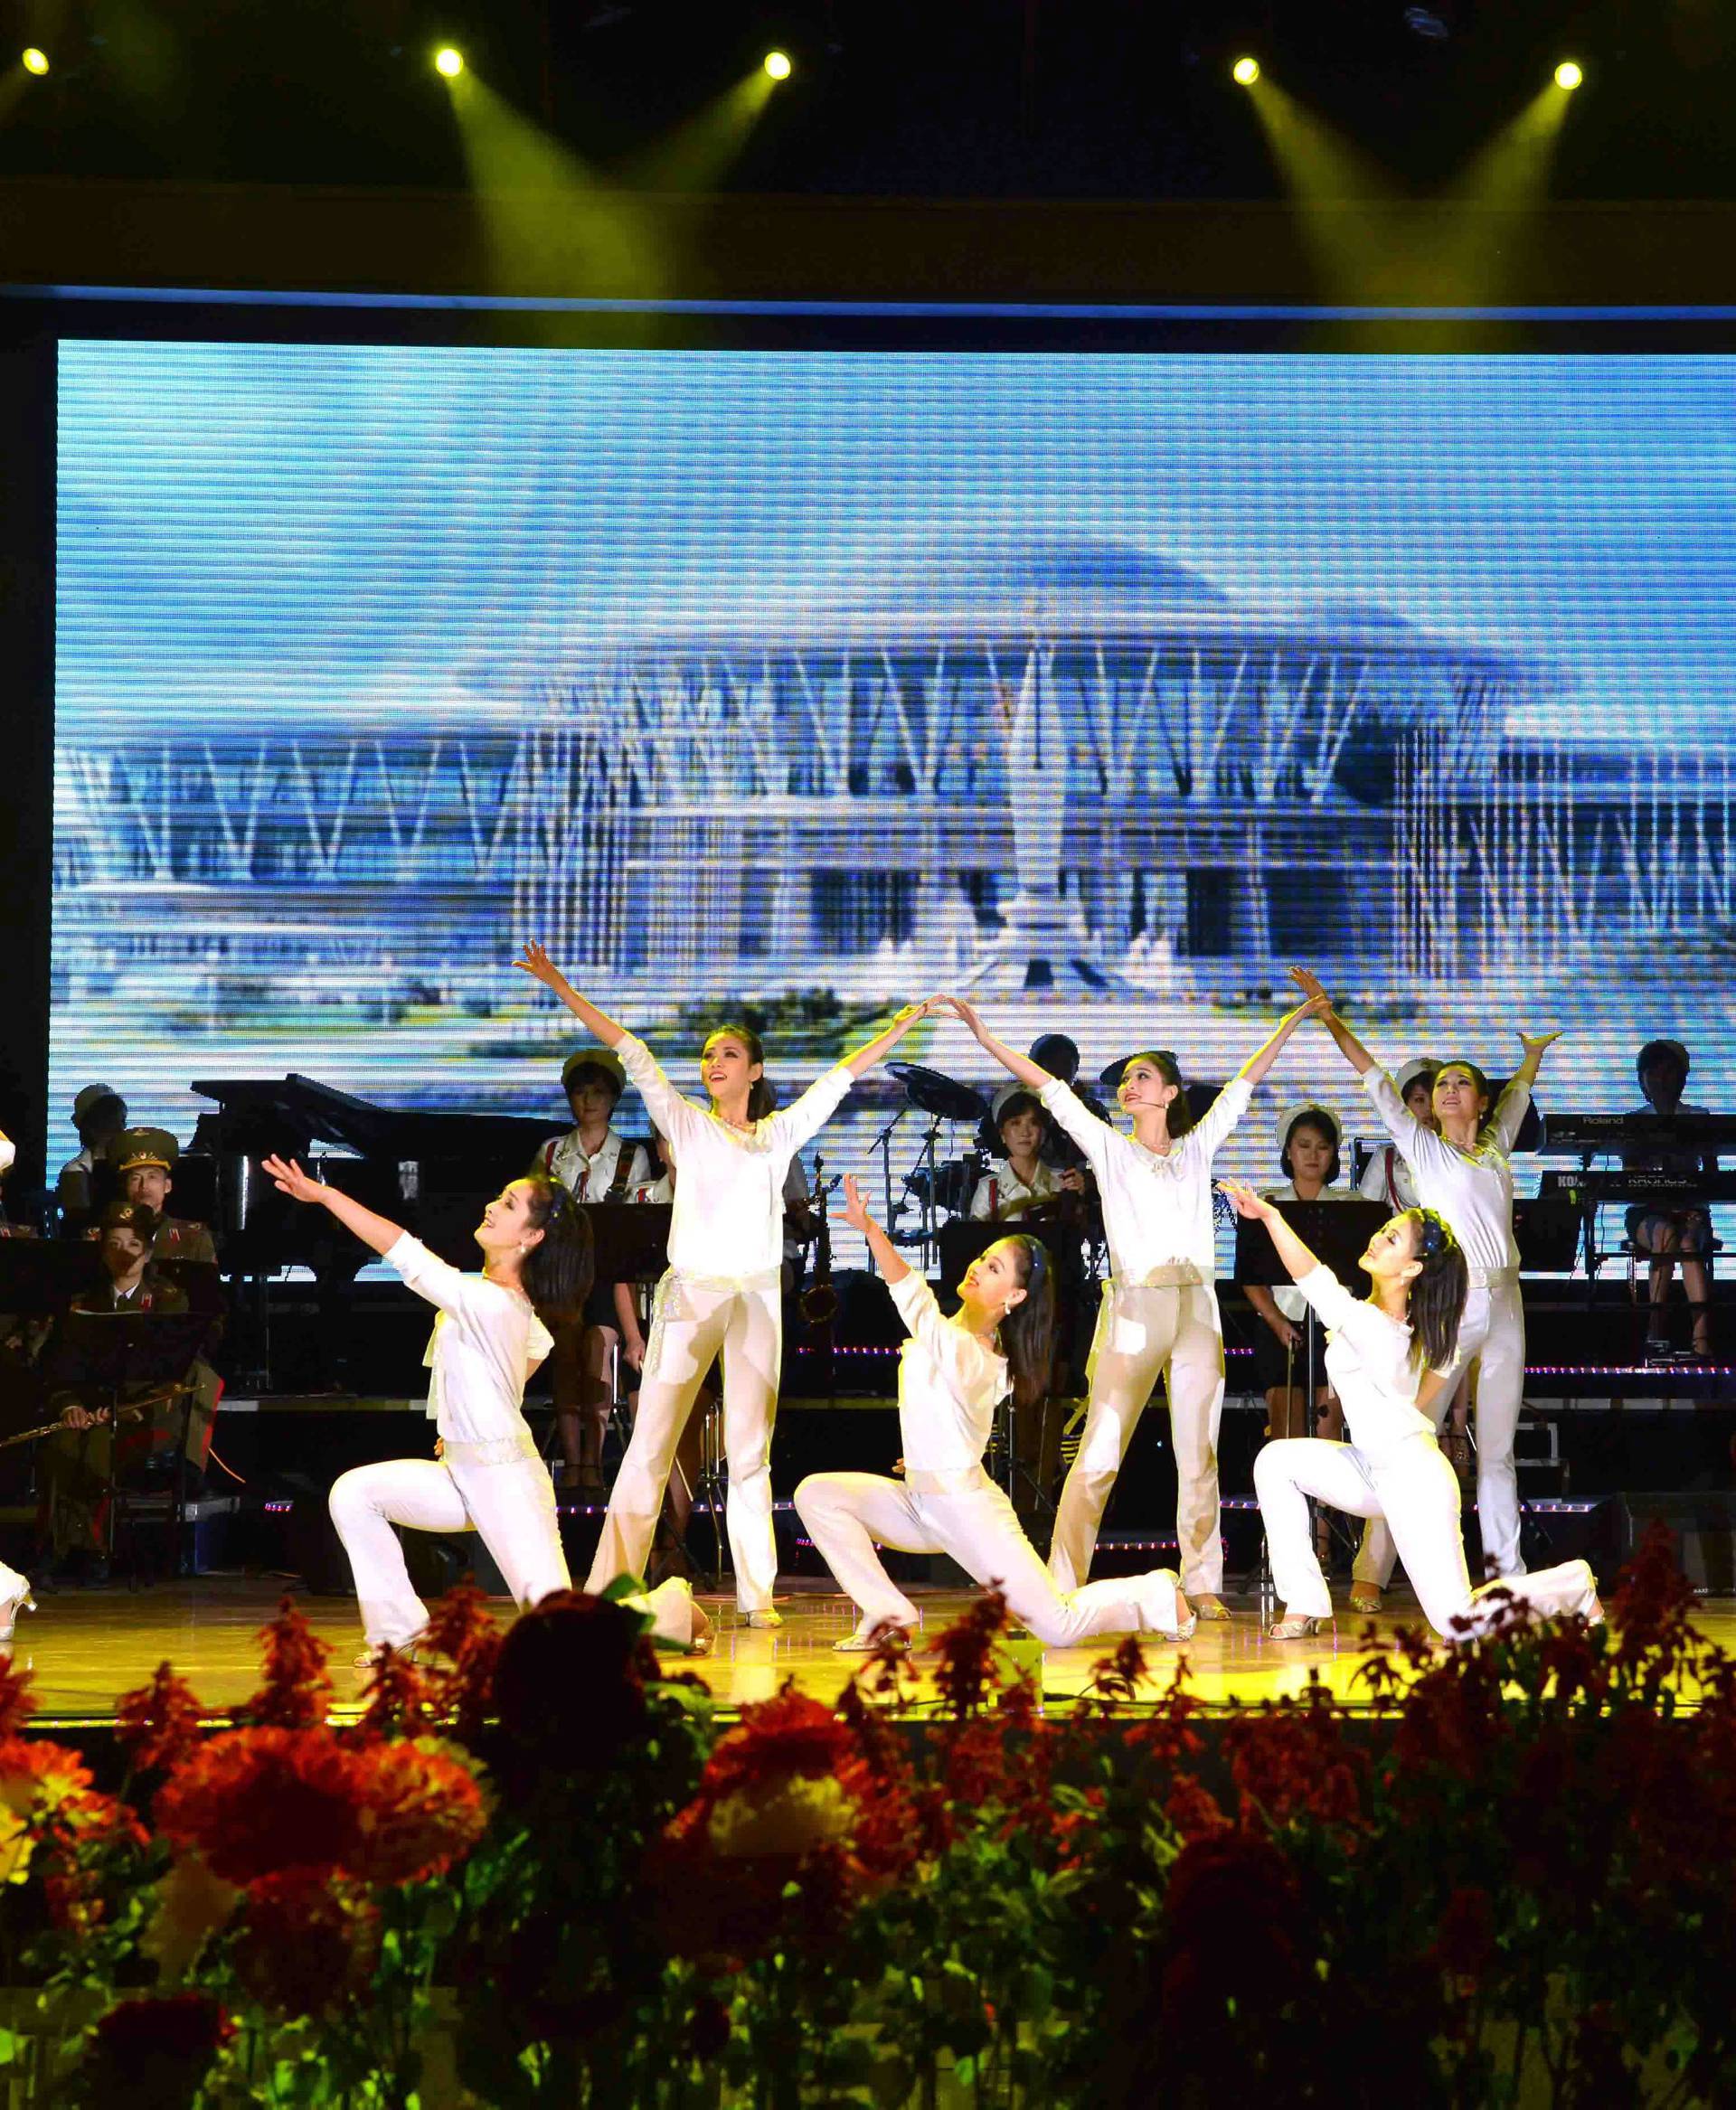 Artists of the Moranbong Band, the State Merited Chorus and the Wangjaesan Art Troupe, perform in Wonsan City of Kangwon Province